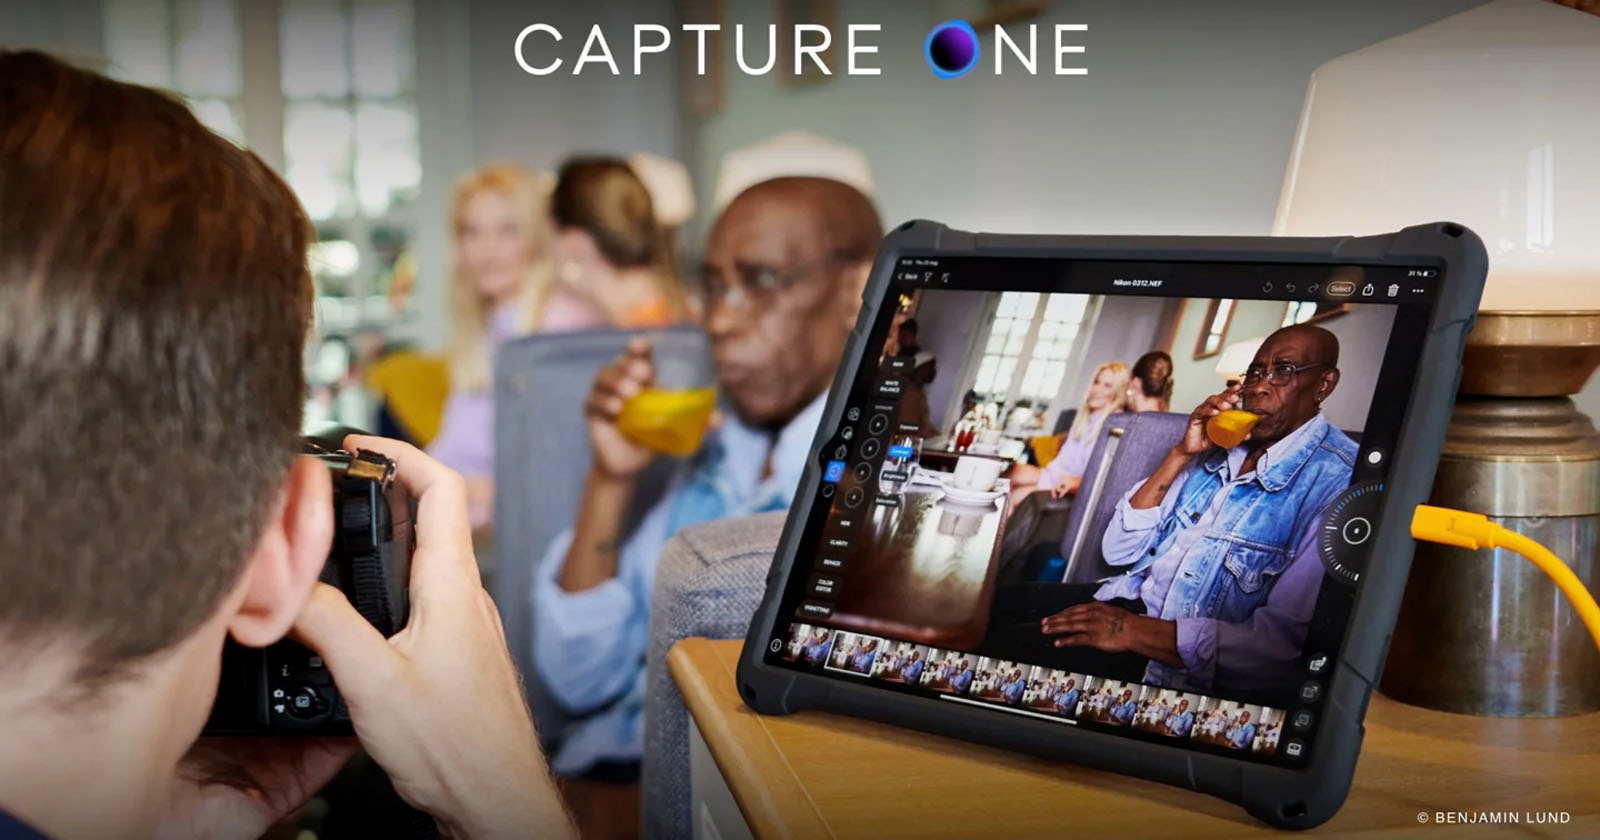 capture-one-adds-wired-or-wireless-tethering-capability-to-its-ipad-app